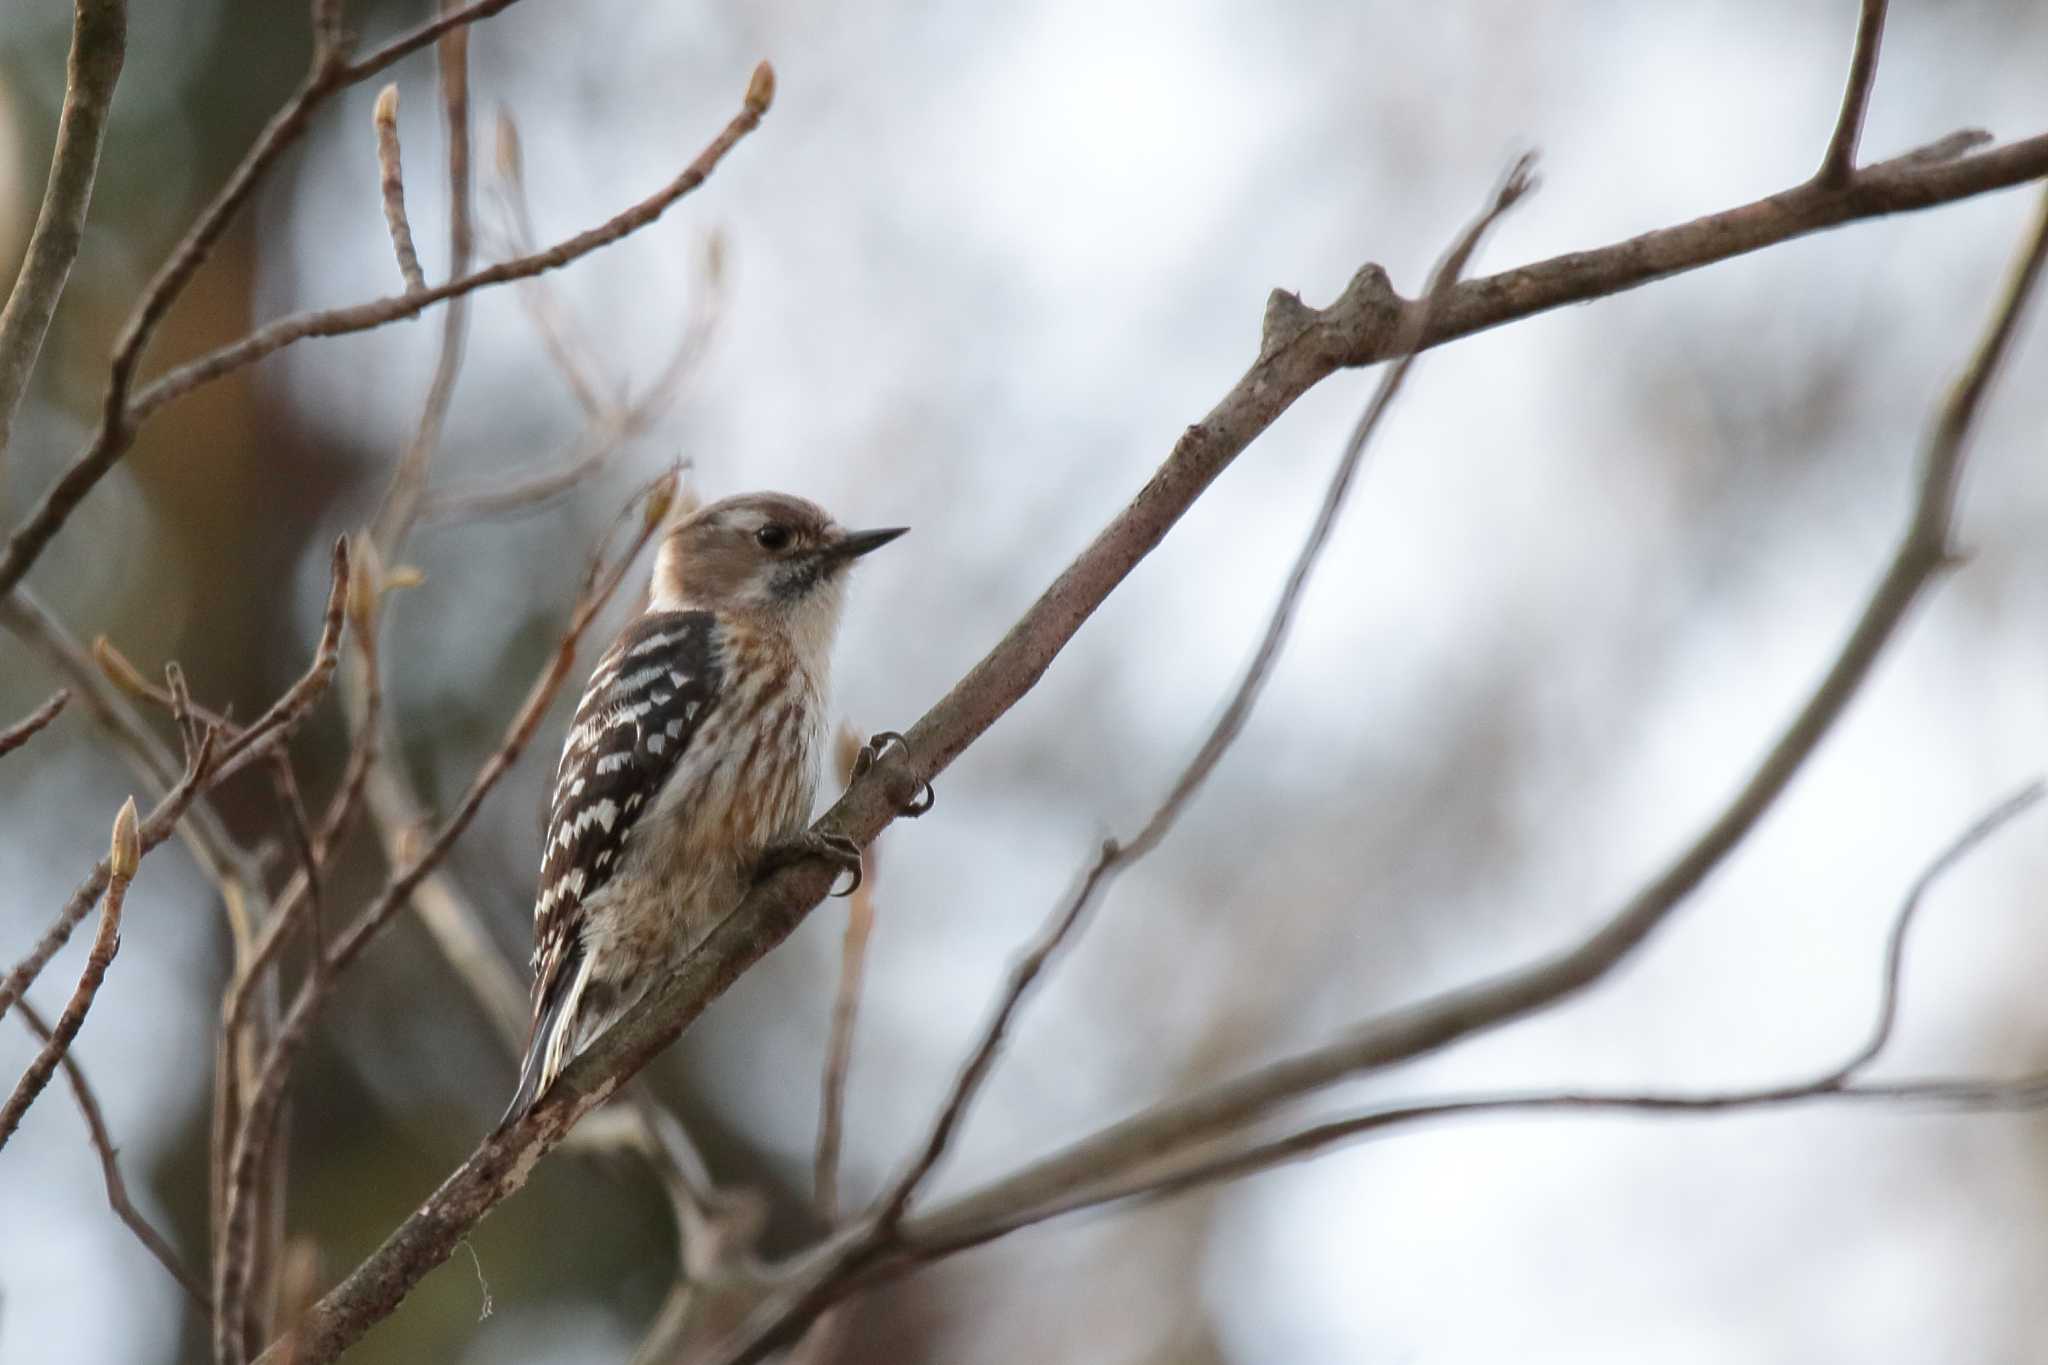 Photo of Japanese Pygmy Woodpecker at 各務野自然遺産の森 by Button-Down Freak